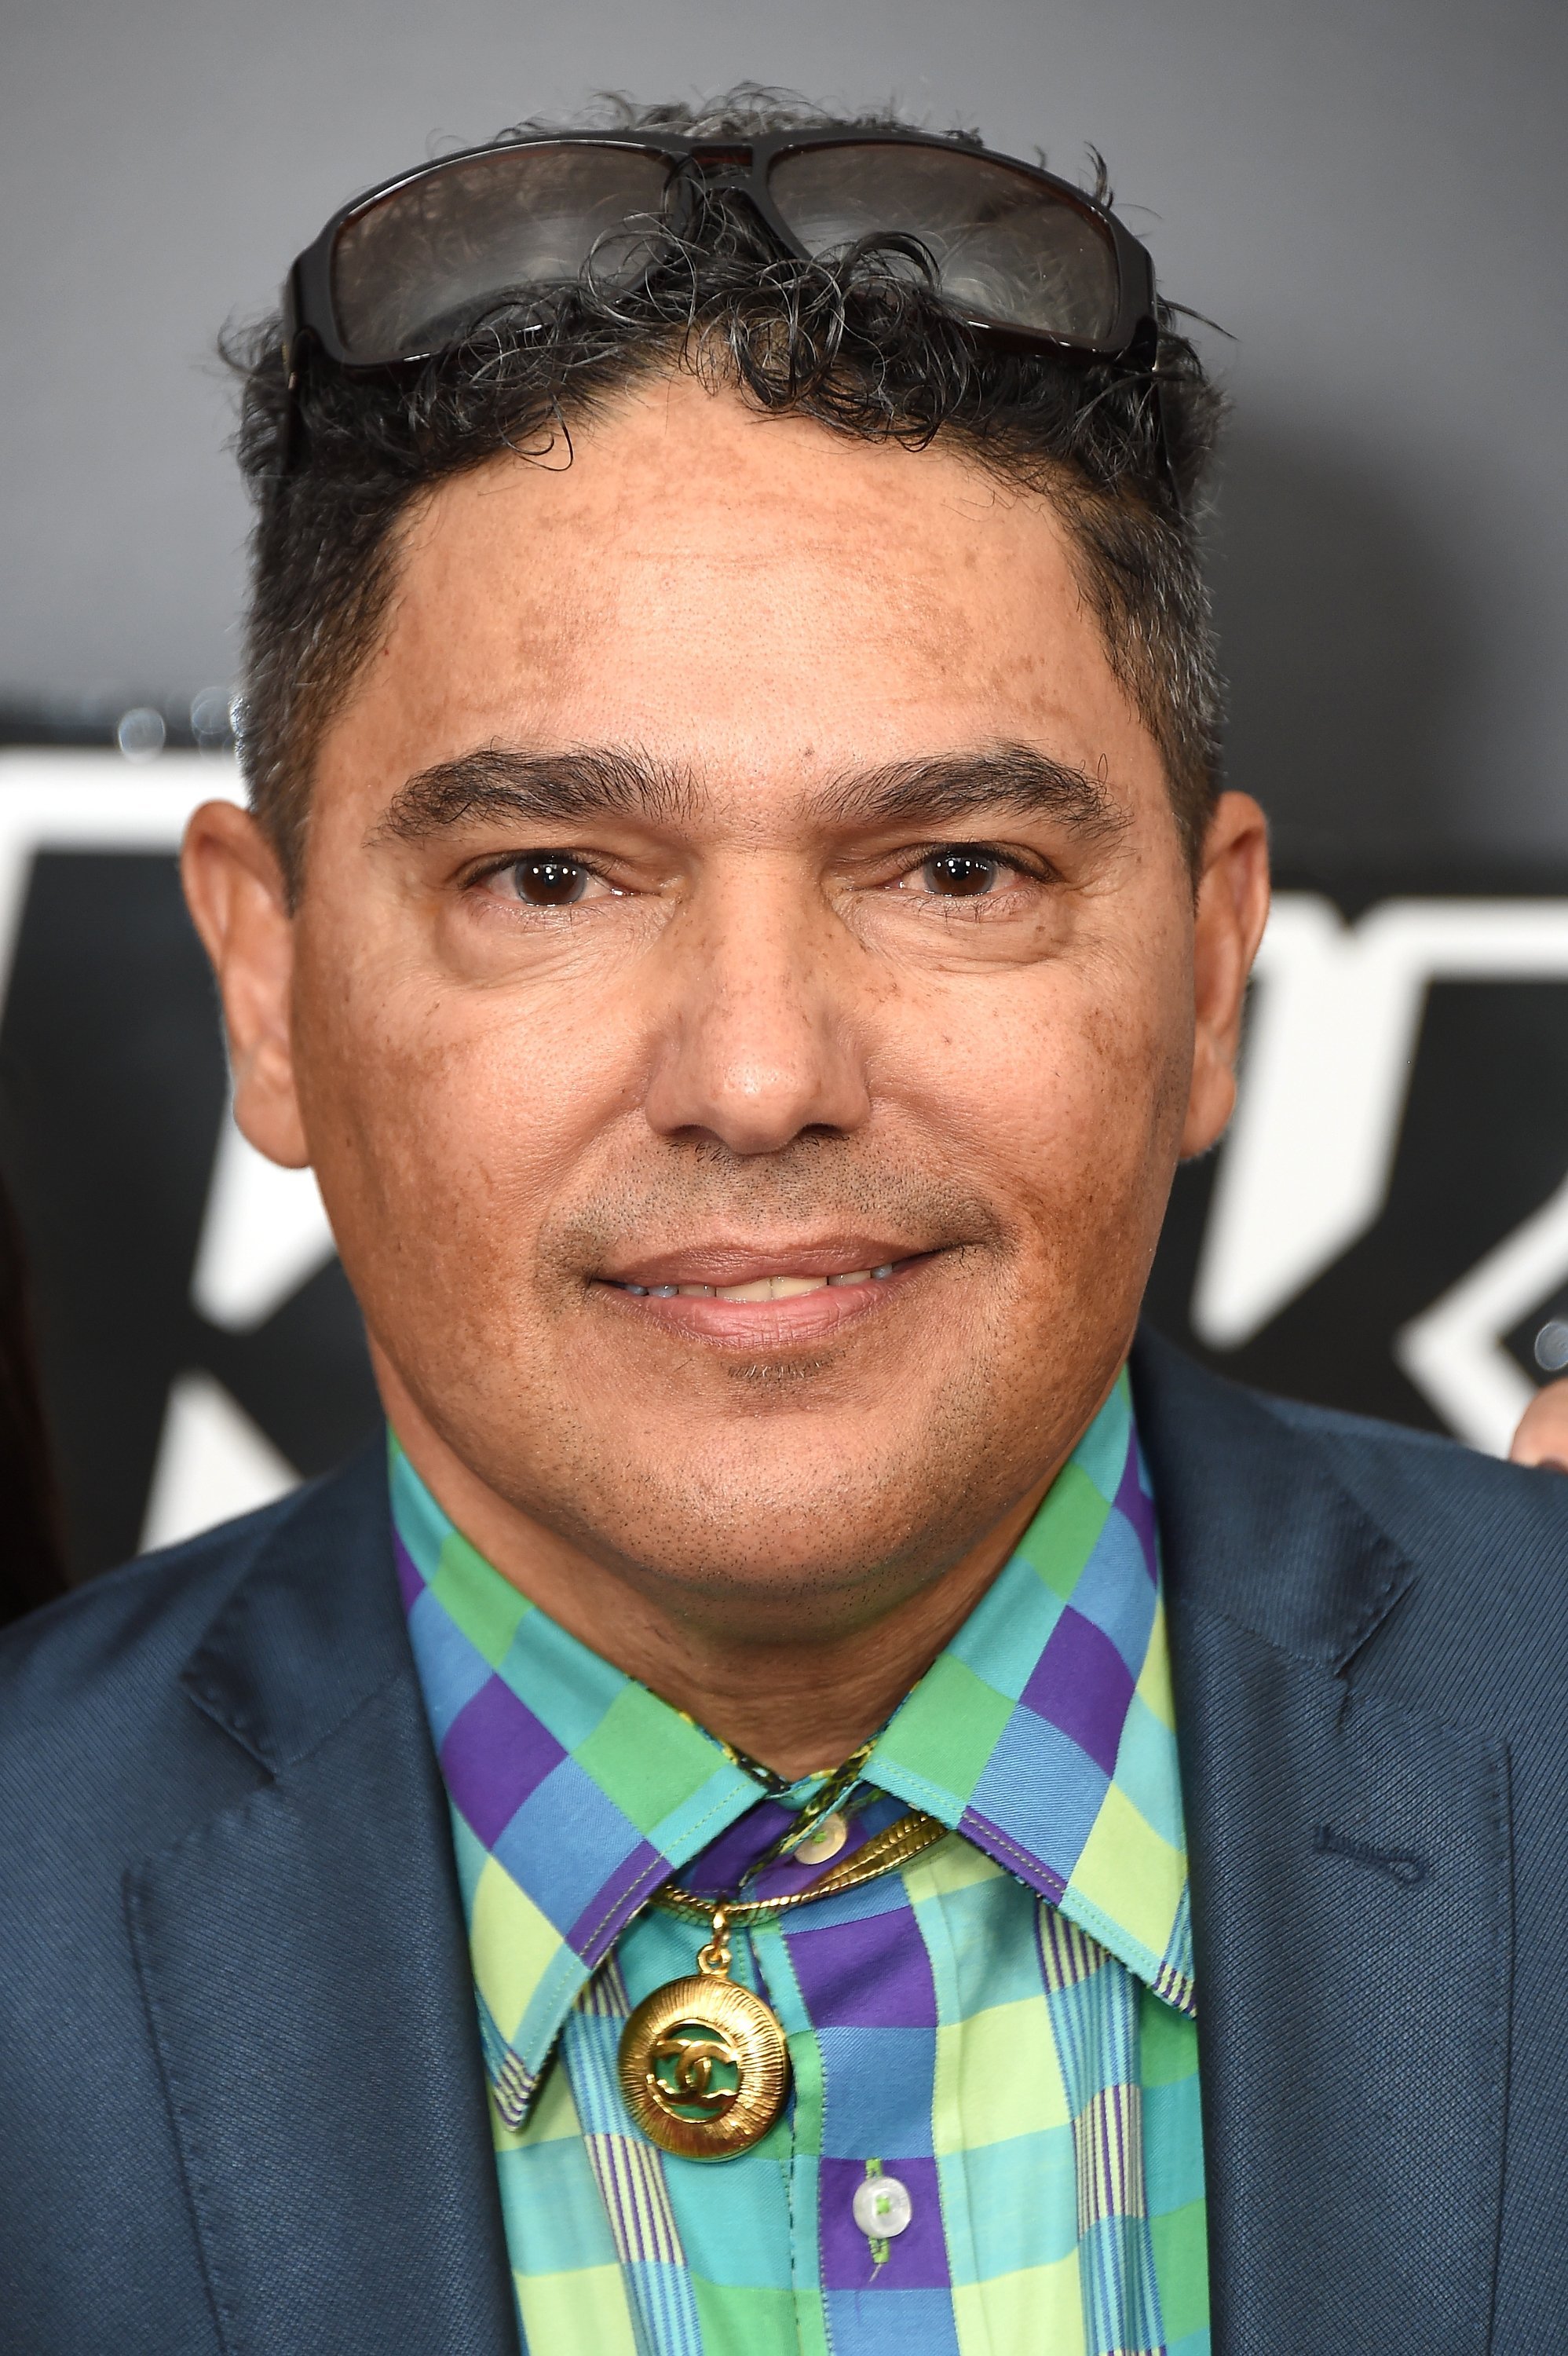 Nicholas Turturro at the "BlacKkKlansman" New York Premiere on July 30, 2018 in New York City. | Source: Getty Images